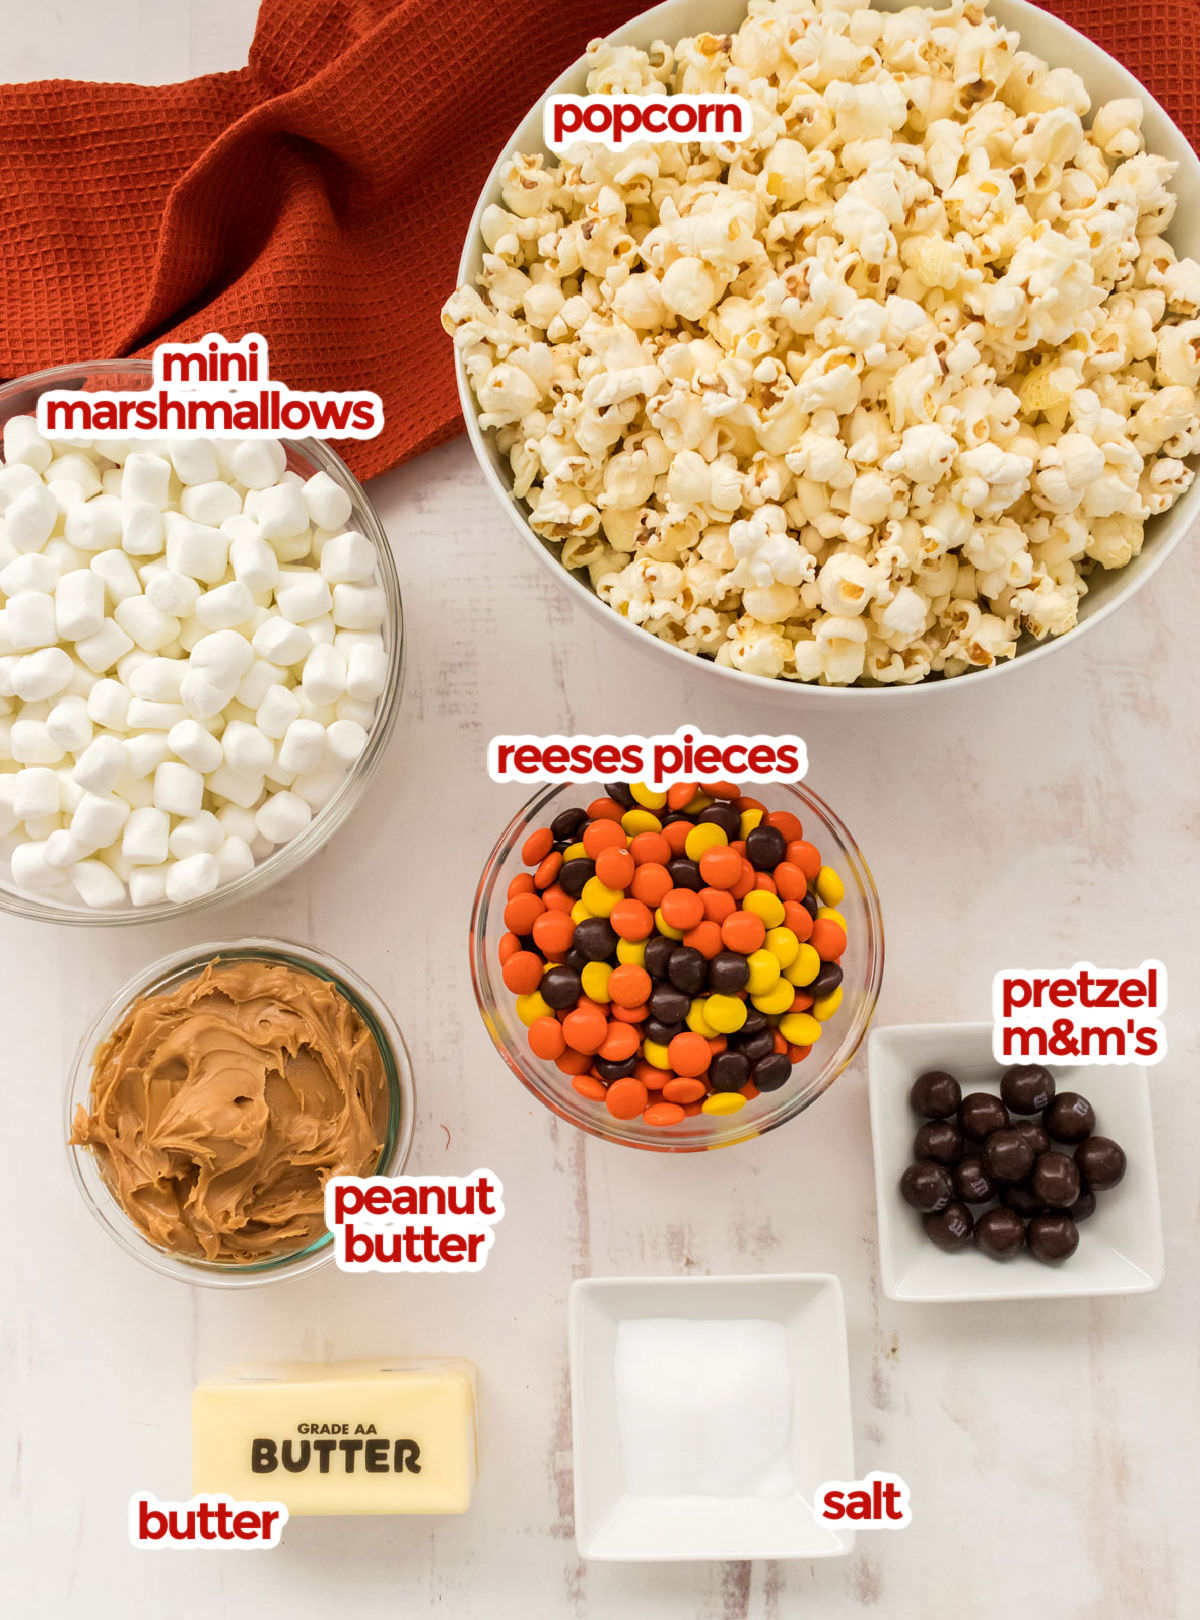 All the ingredients you will need to make Peanut Butter Popcorn including popcorn, mini marshmallows, peanut butter, butter, salt, Reese's Pieces and Pretzel M&M's.